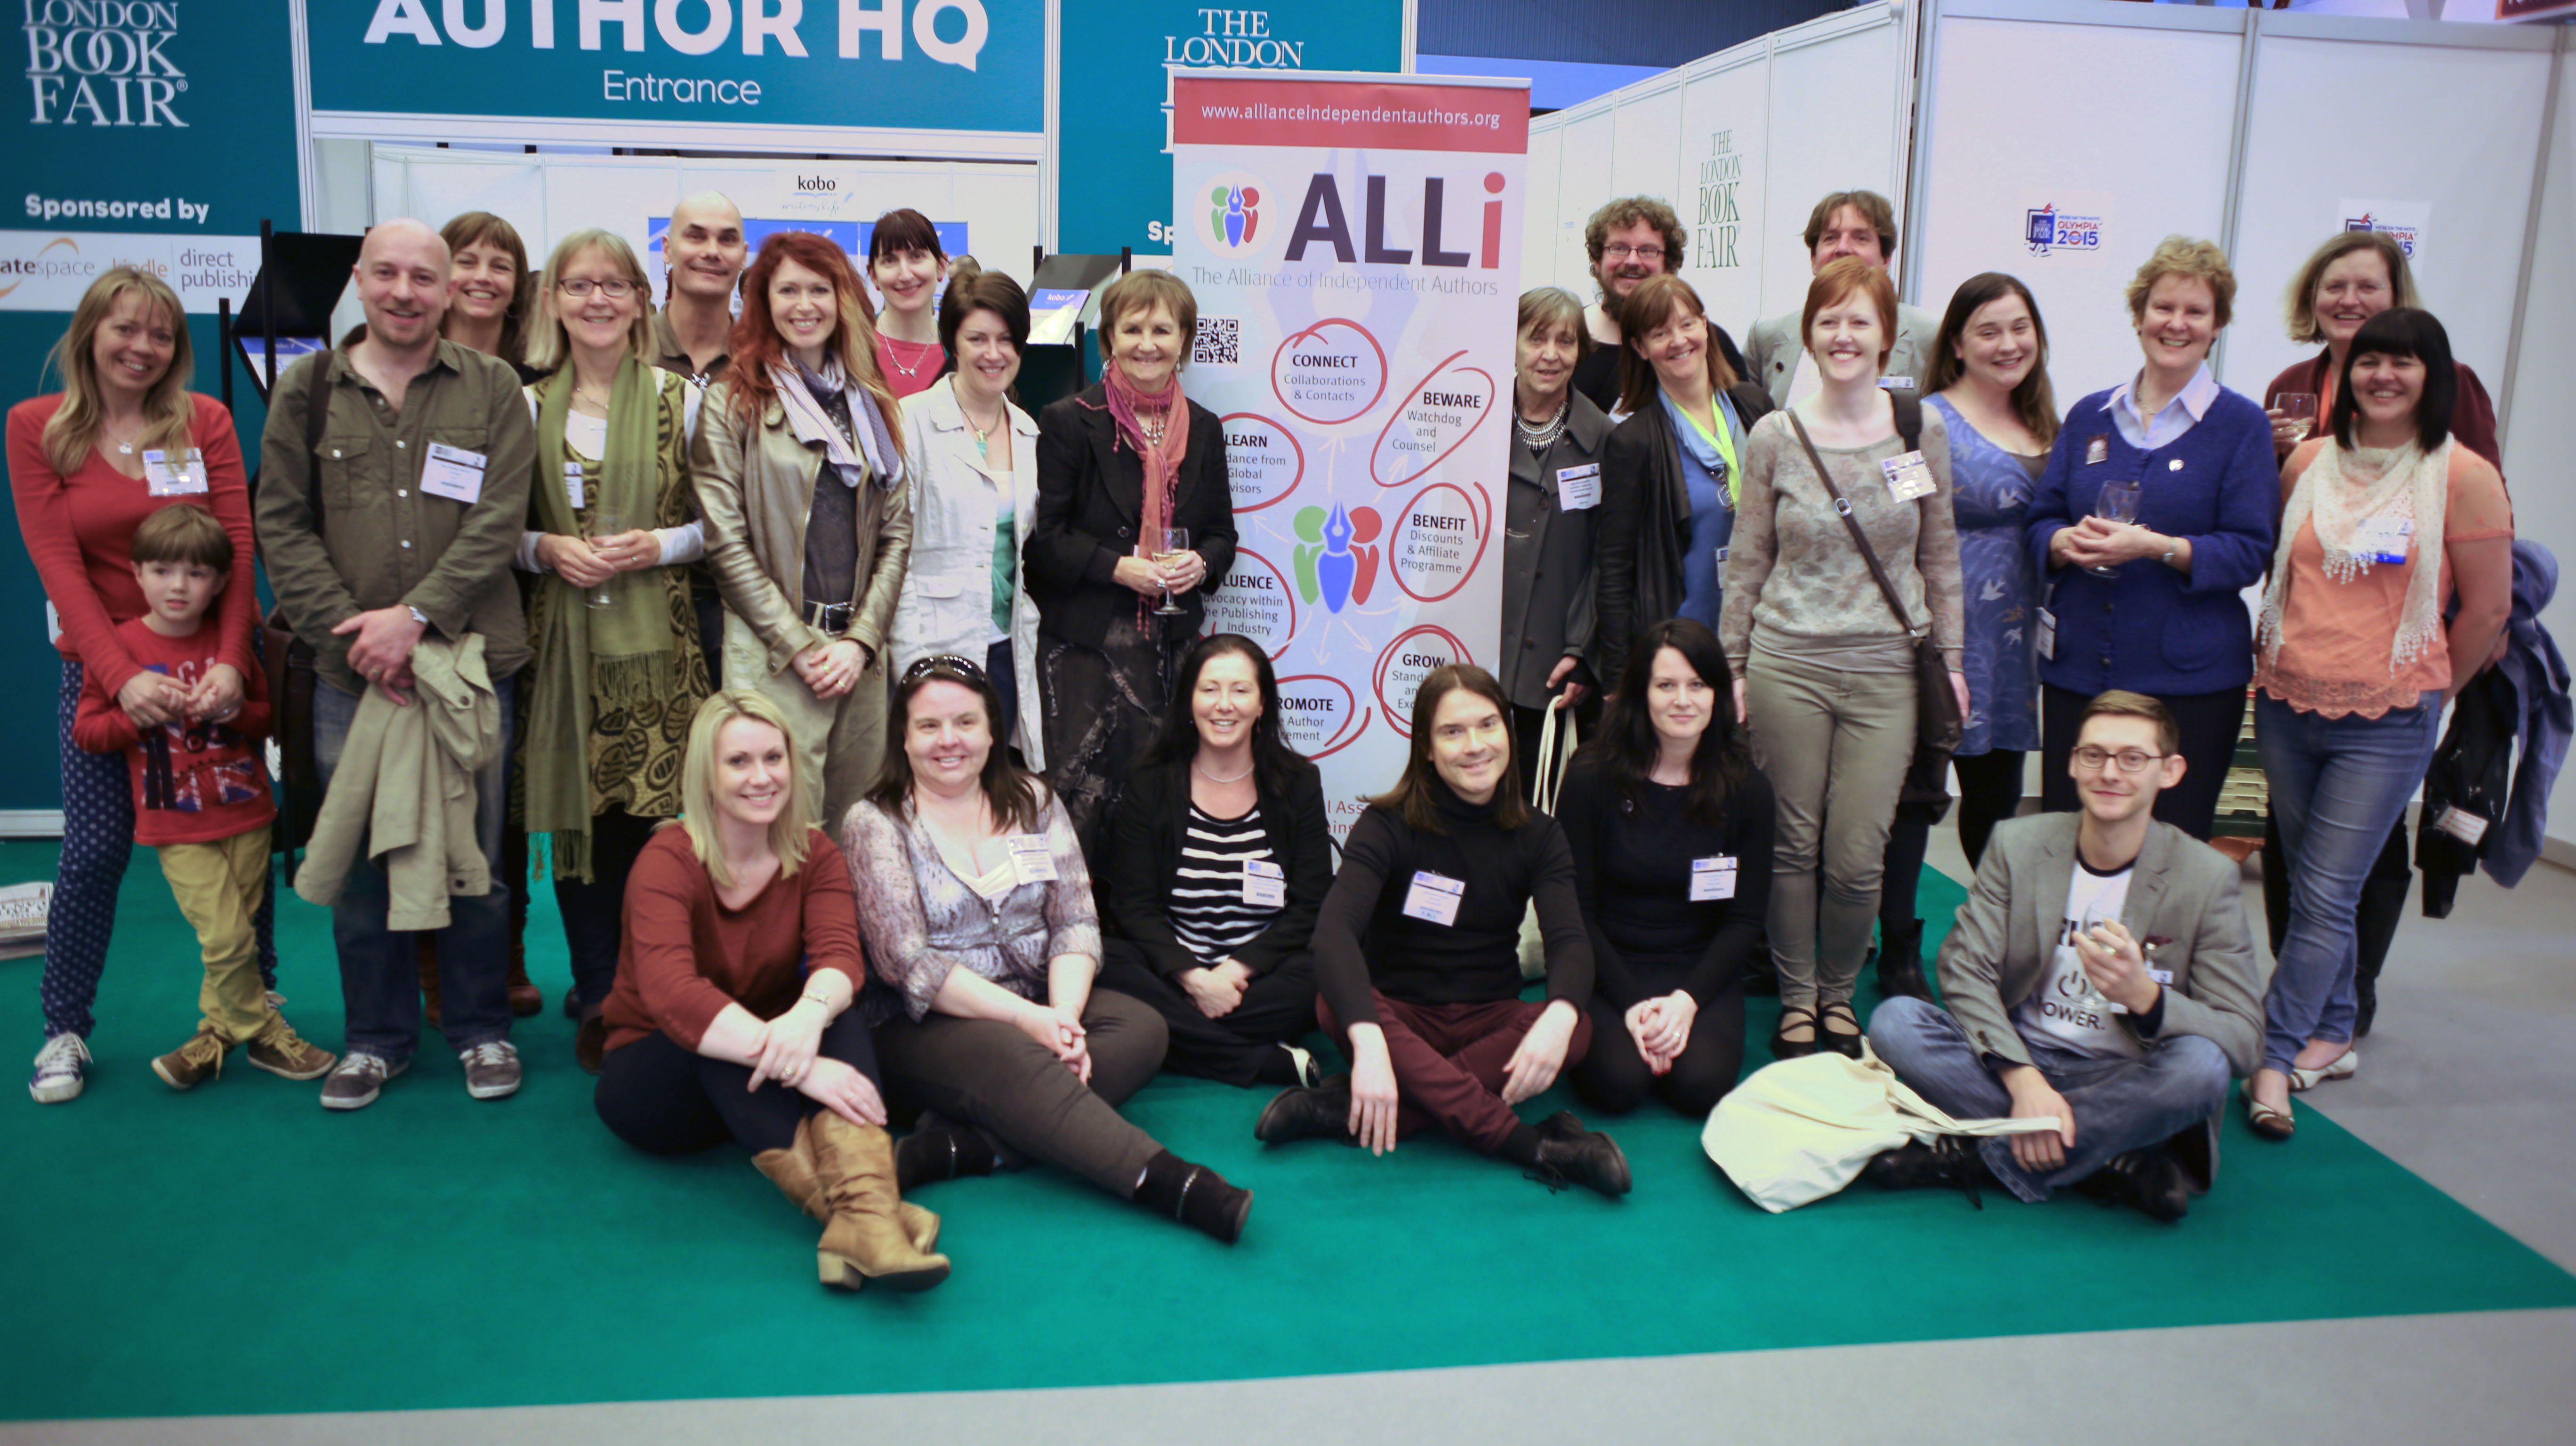 ALLiance of Independent Authors members at The London Book Fair